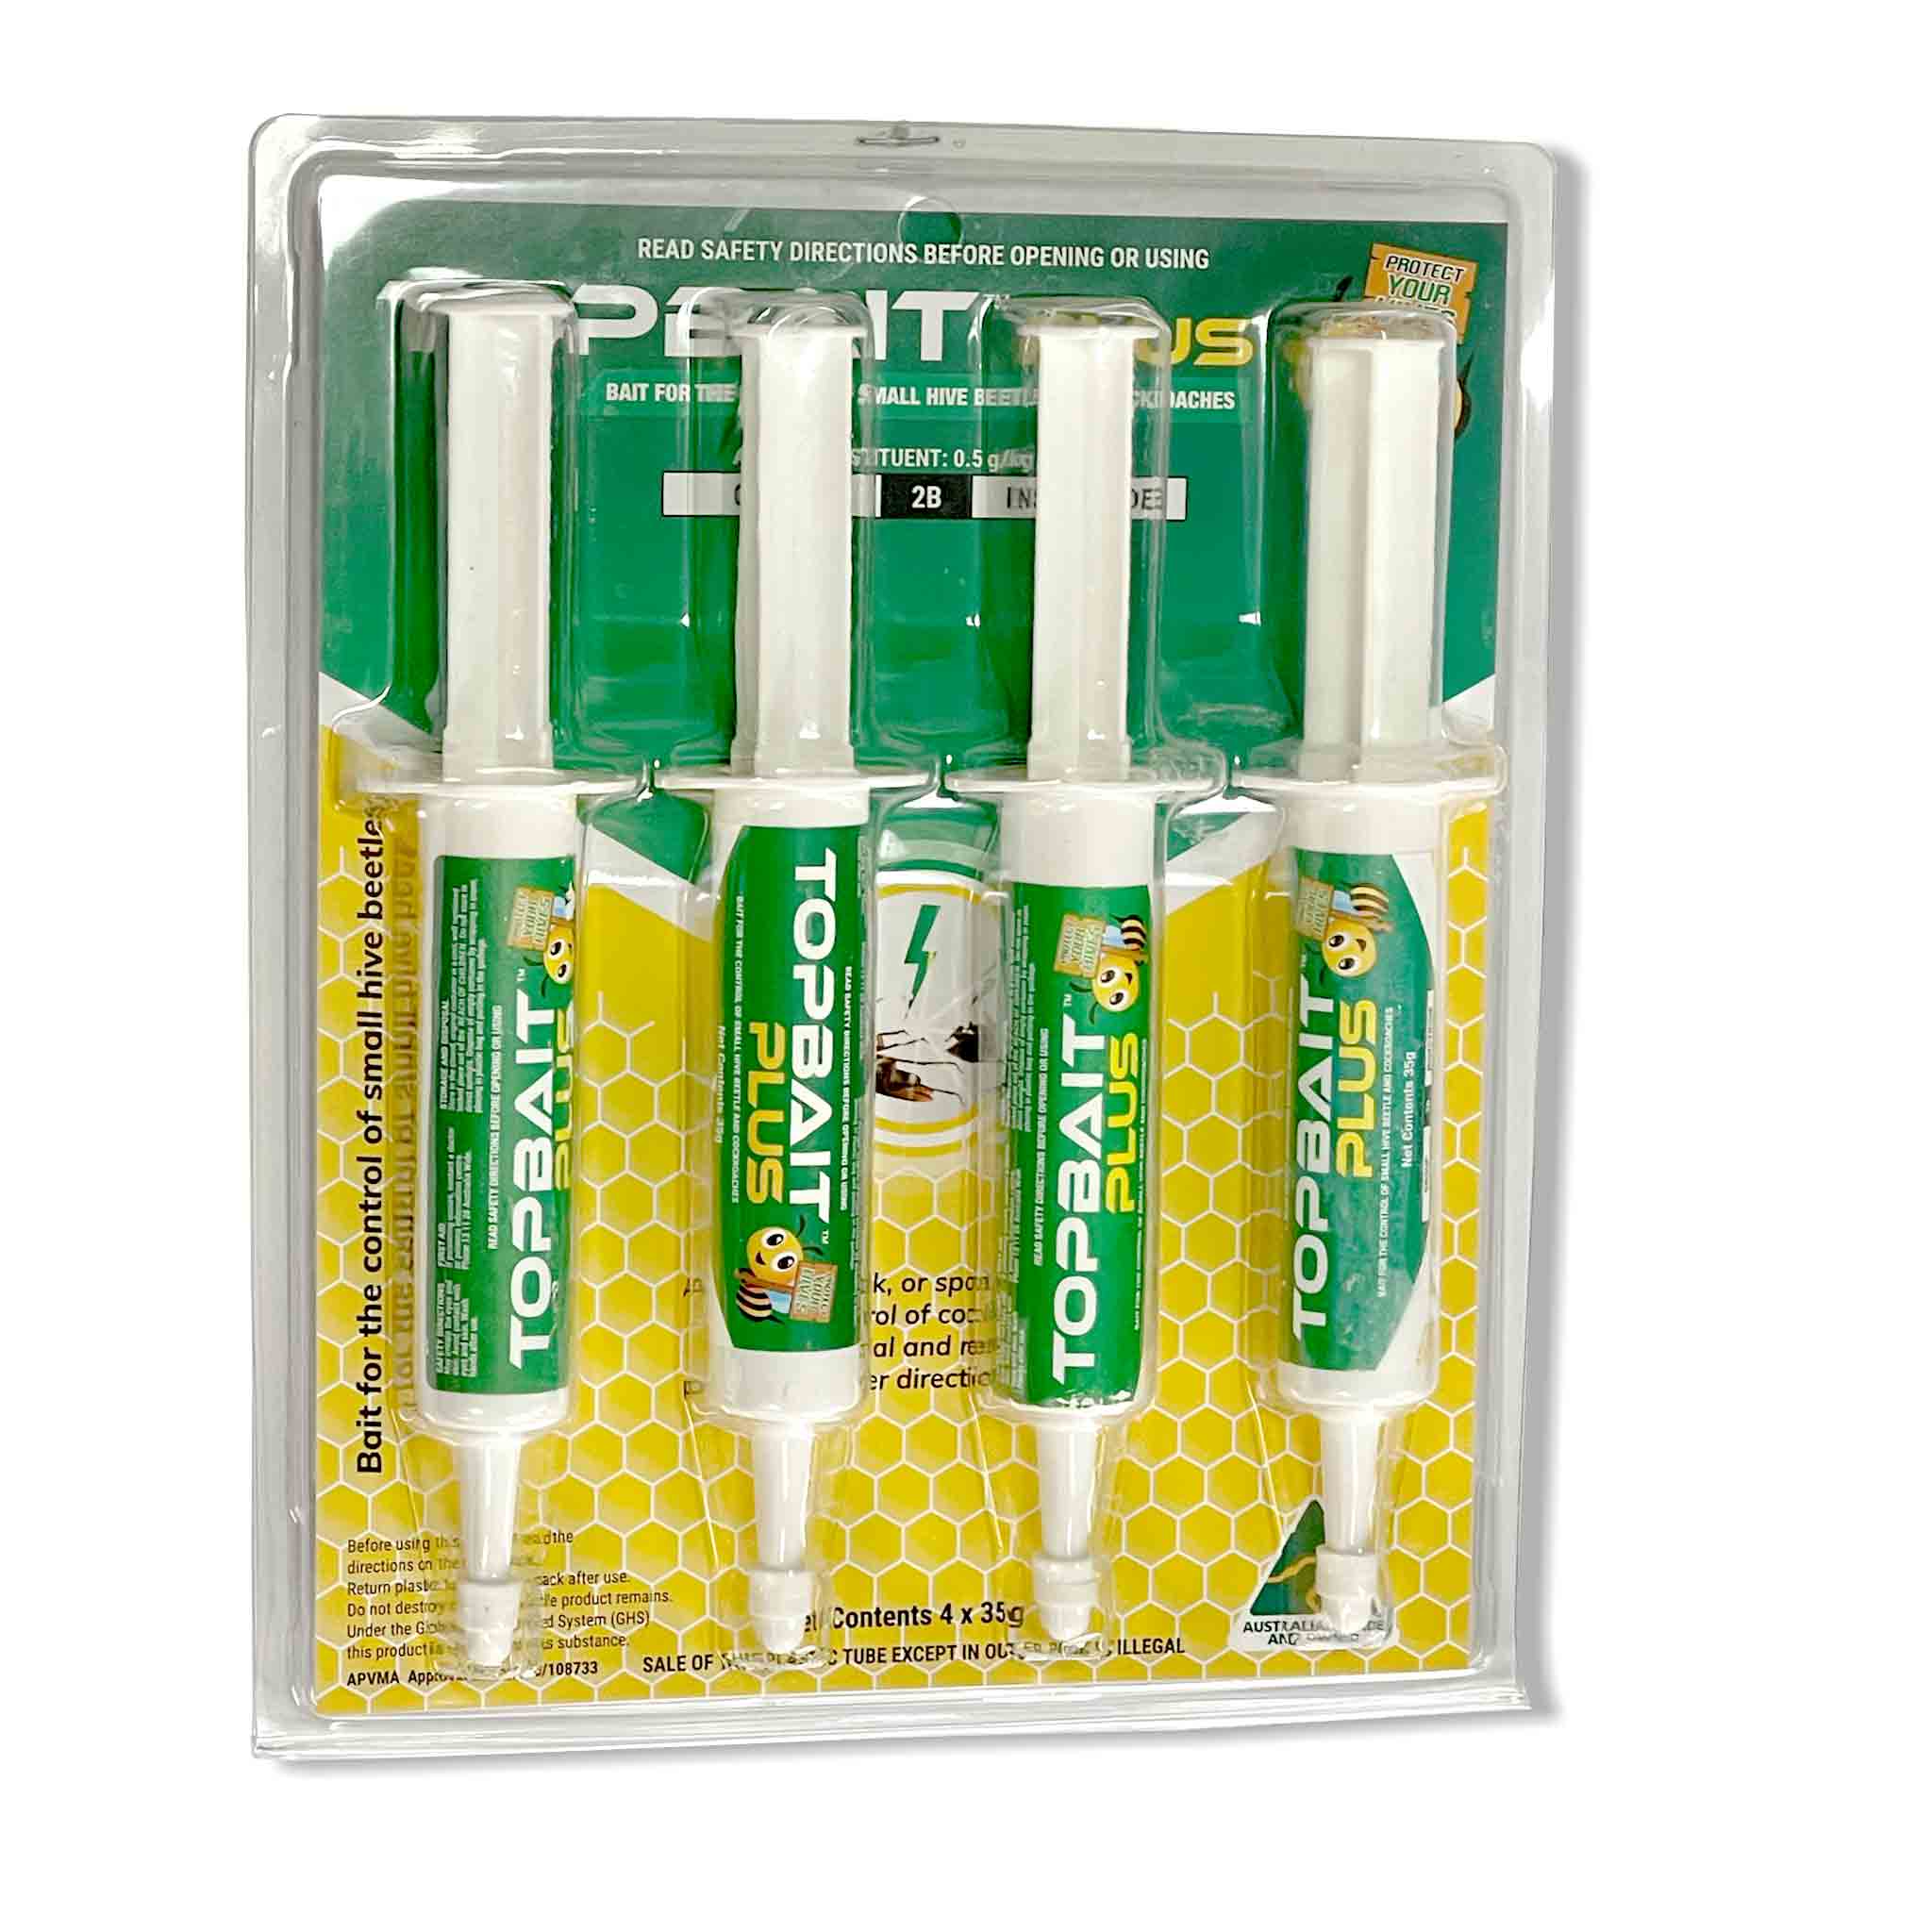 TopBait Plus 4 x 35g Pack Applicators for Treatment and Control of Small Hive Beetles and Cockroaches - Health collection by Buzzbee Beekeeping Supplies